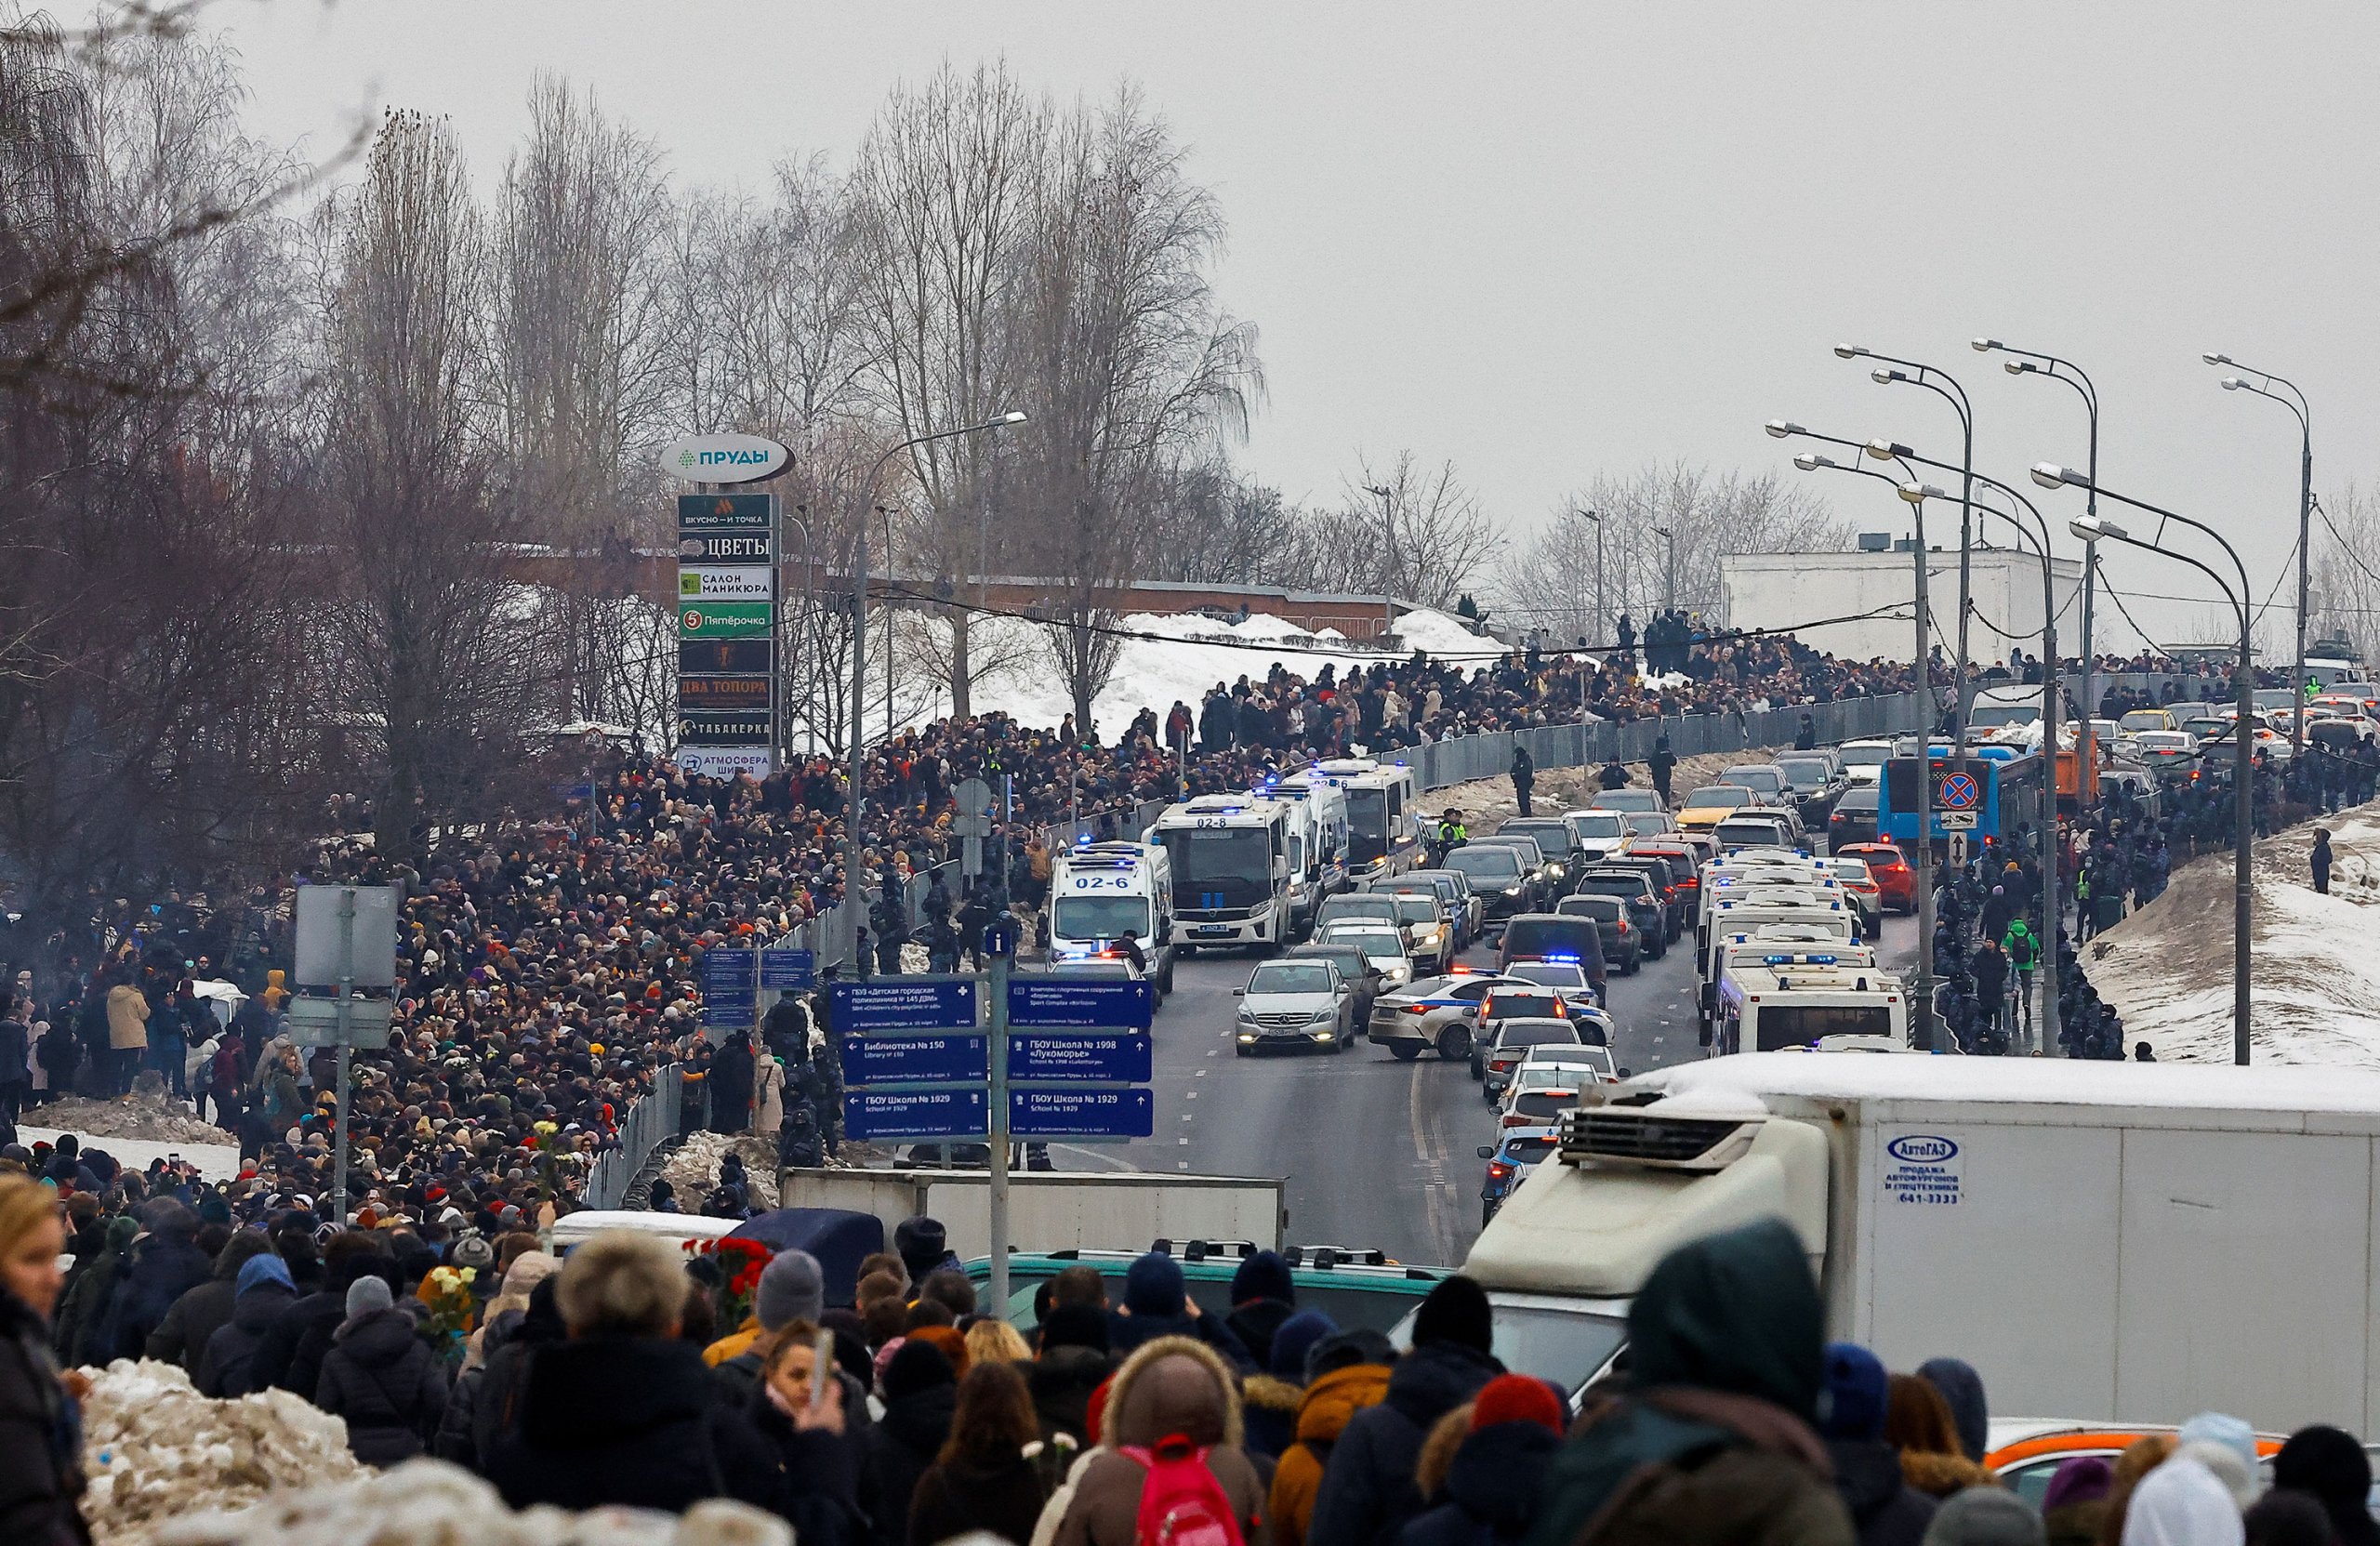 Funeral of Russian opposition leader Alexei Navalny